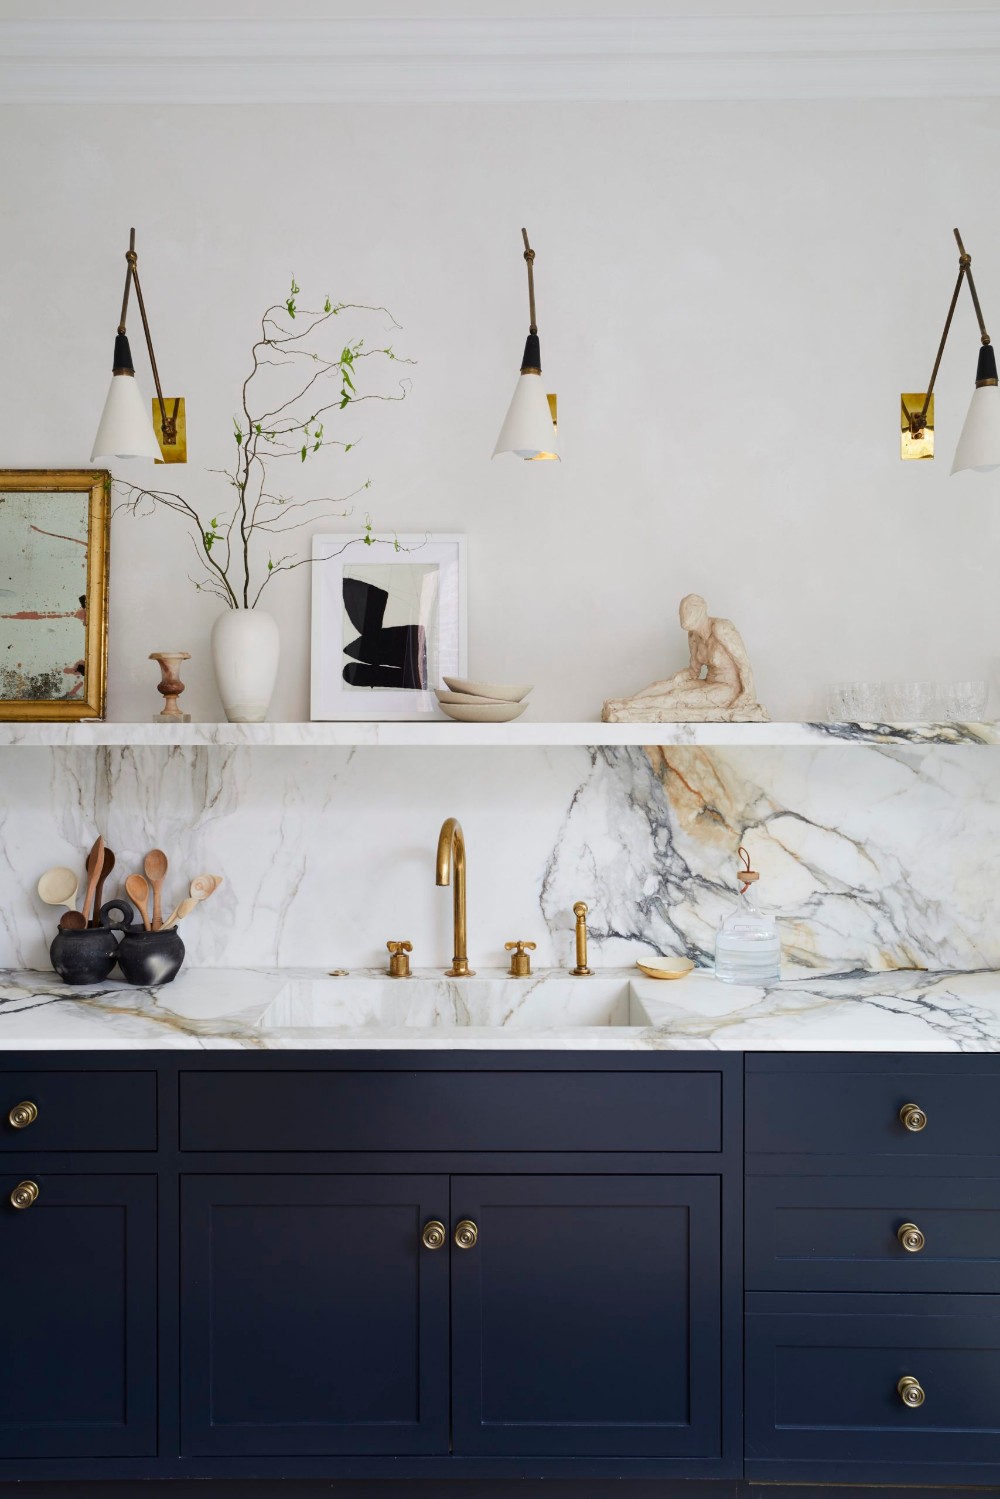 Quartz vs Marble - Which is the better option for my kitchen?